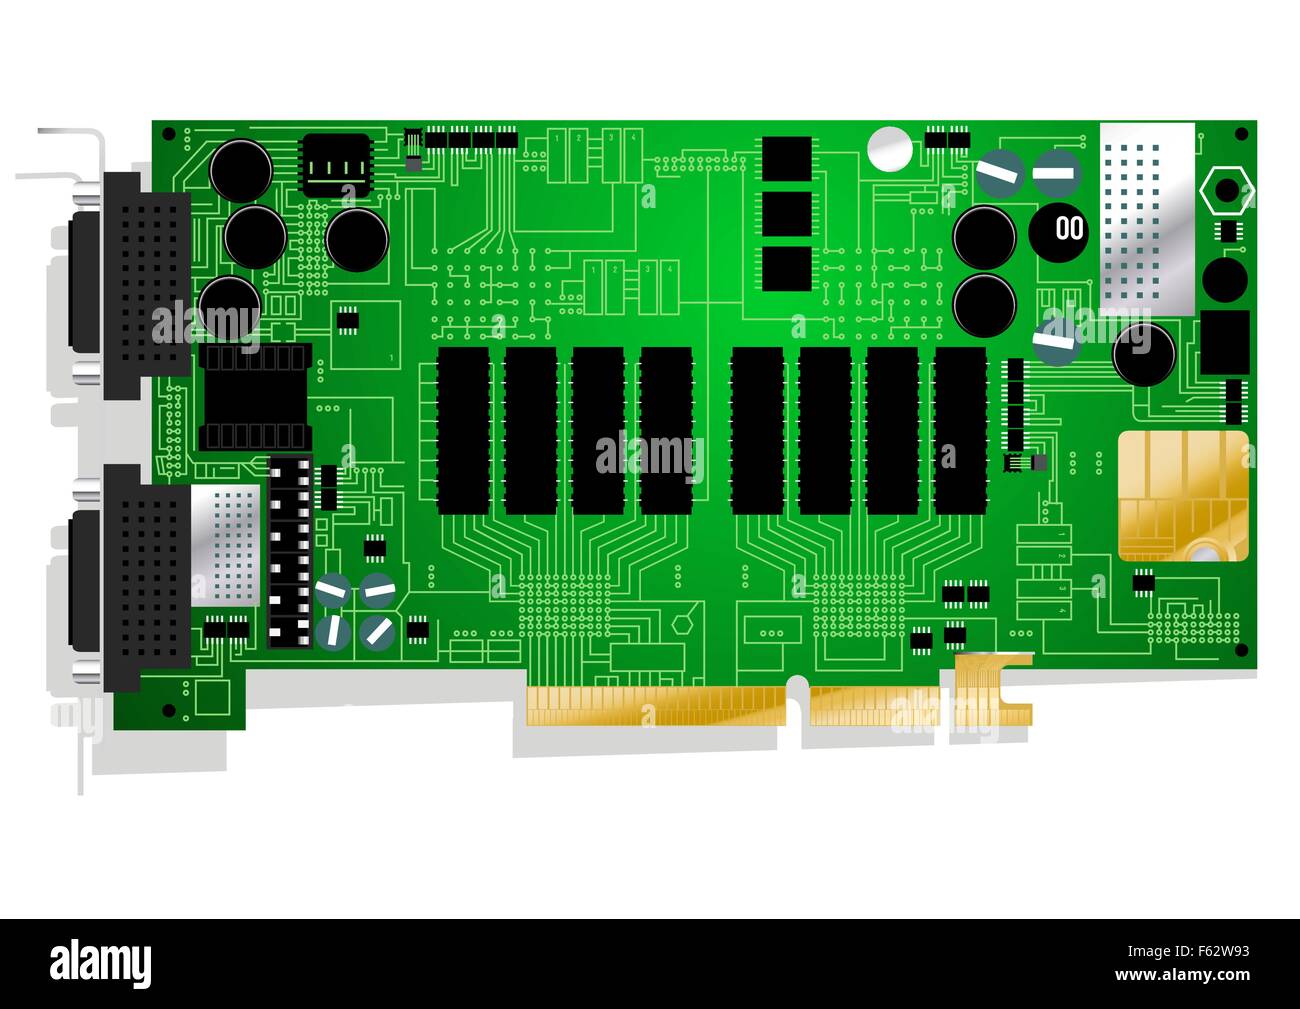 Green graphics card circuit board illustration on white background. Stock Vector